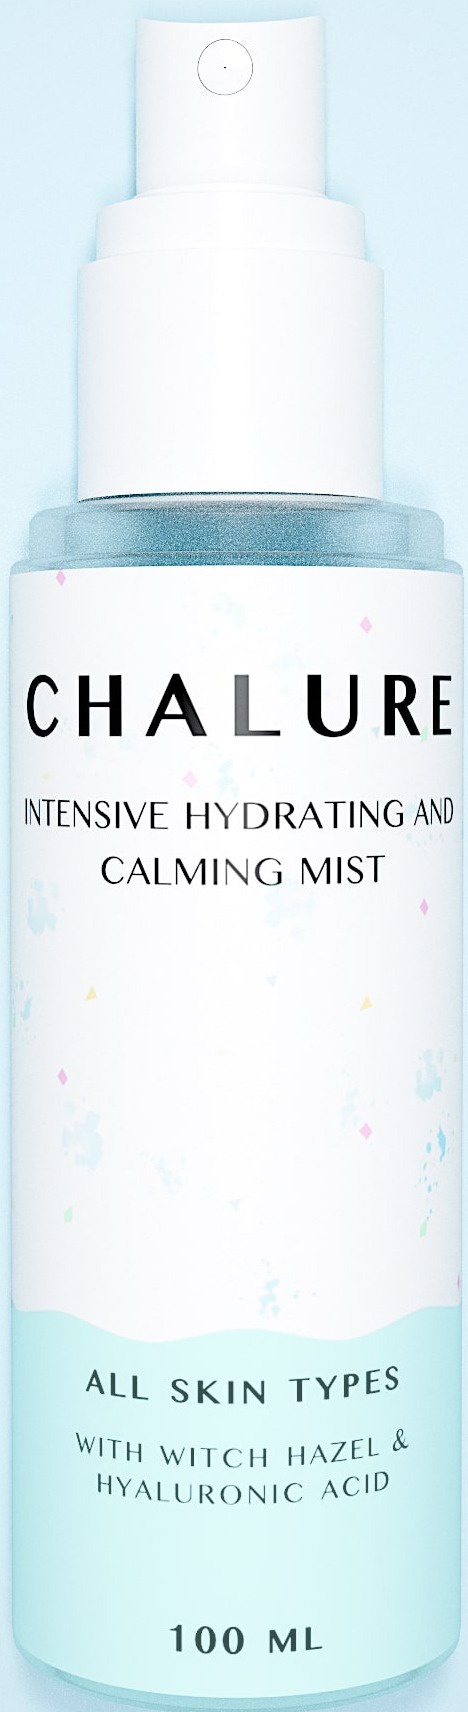 Chalure Intensive Hydrating And Calming Mist With Witch Hazel And Hyaluronic Acid